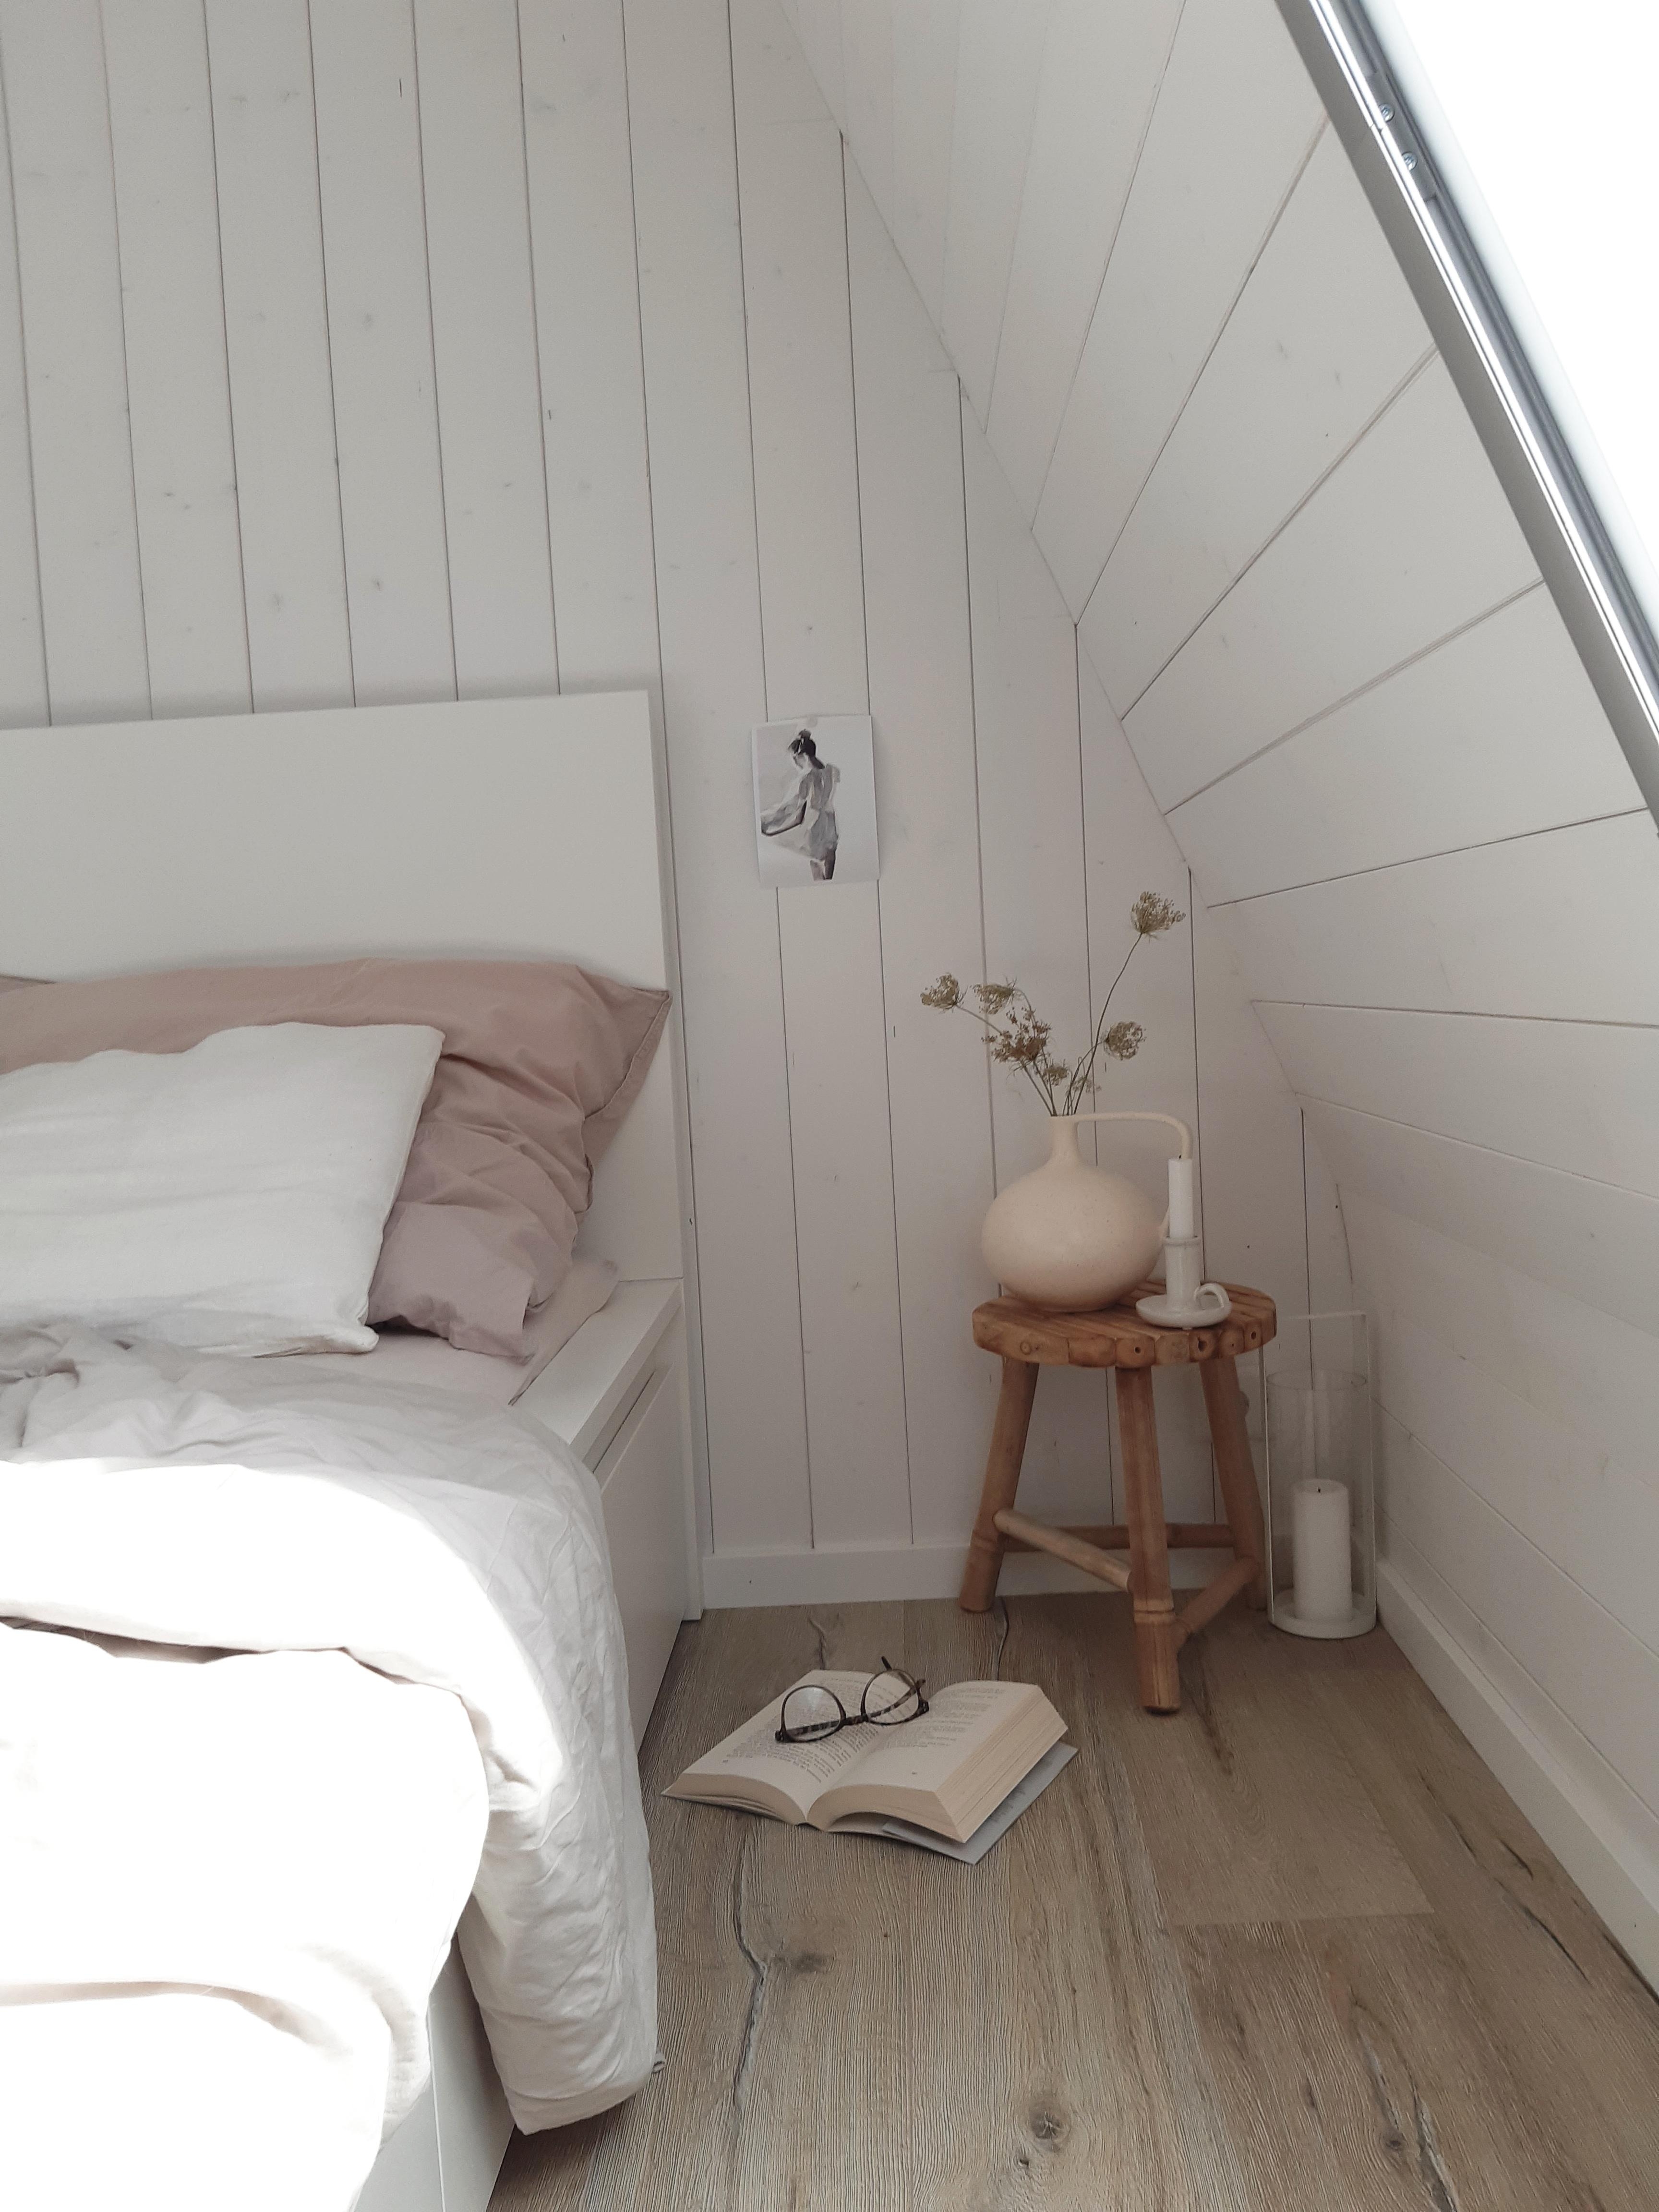 #livingchallange #schlafzimmer #holzhausliebe #tinyhouses #couchstyle 